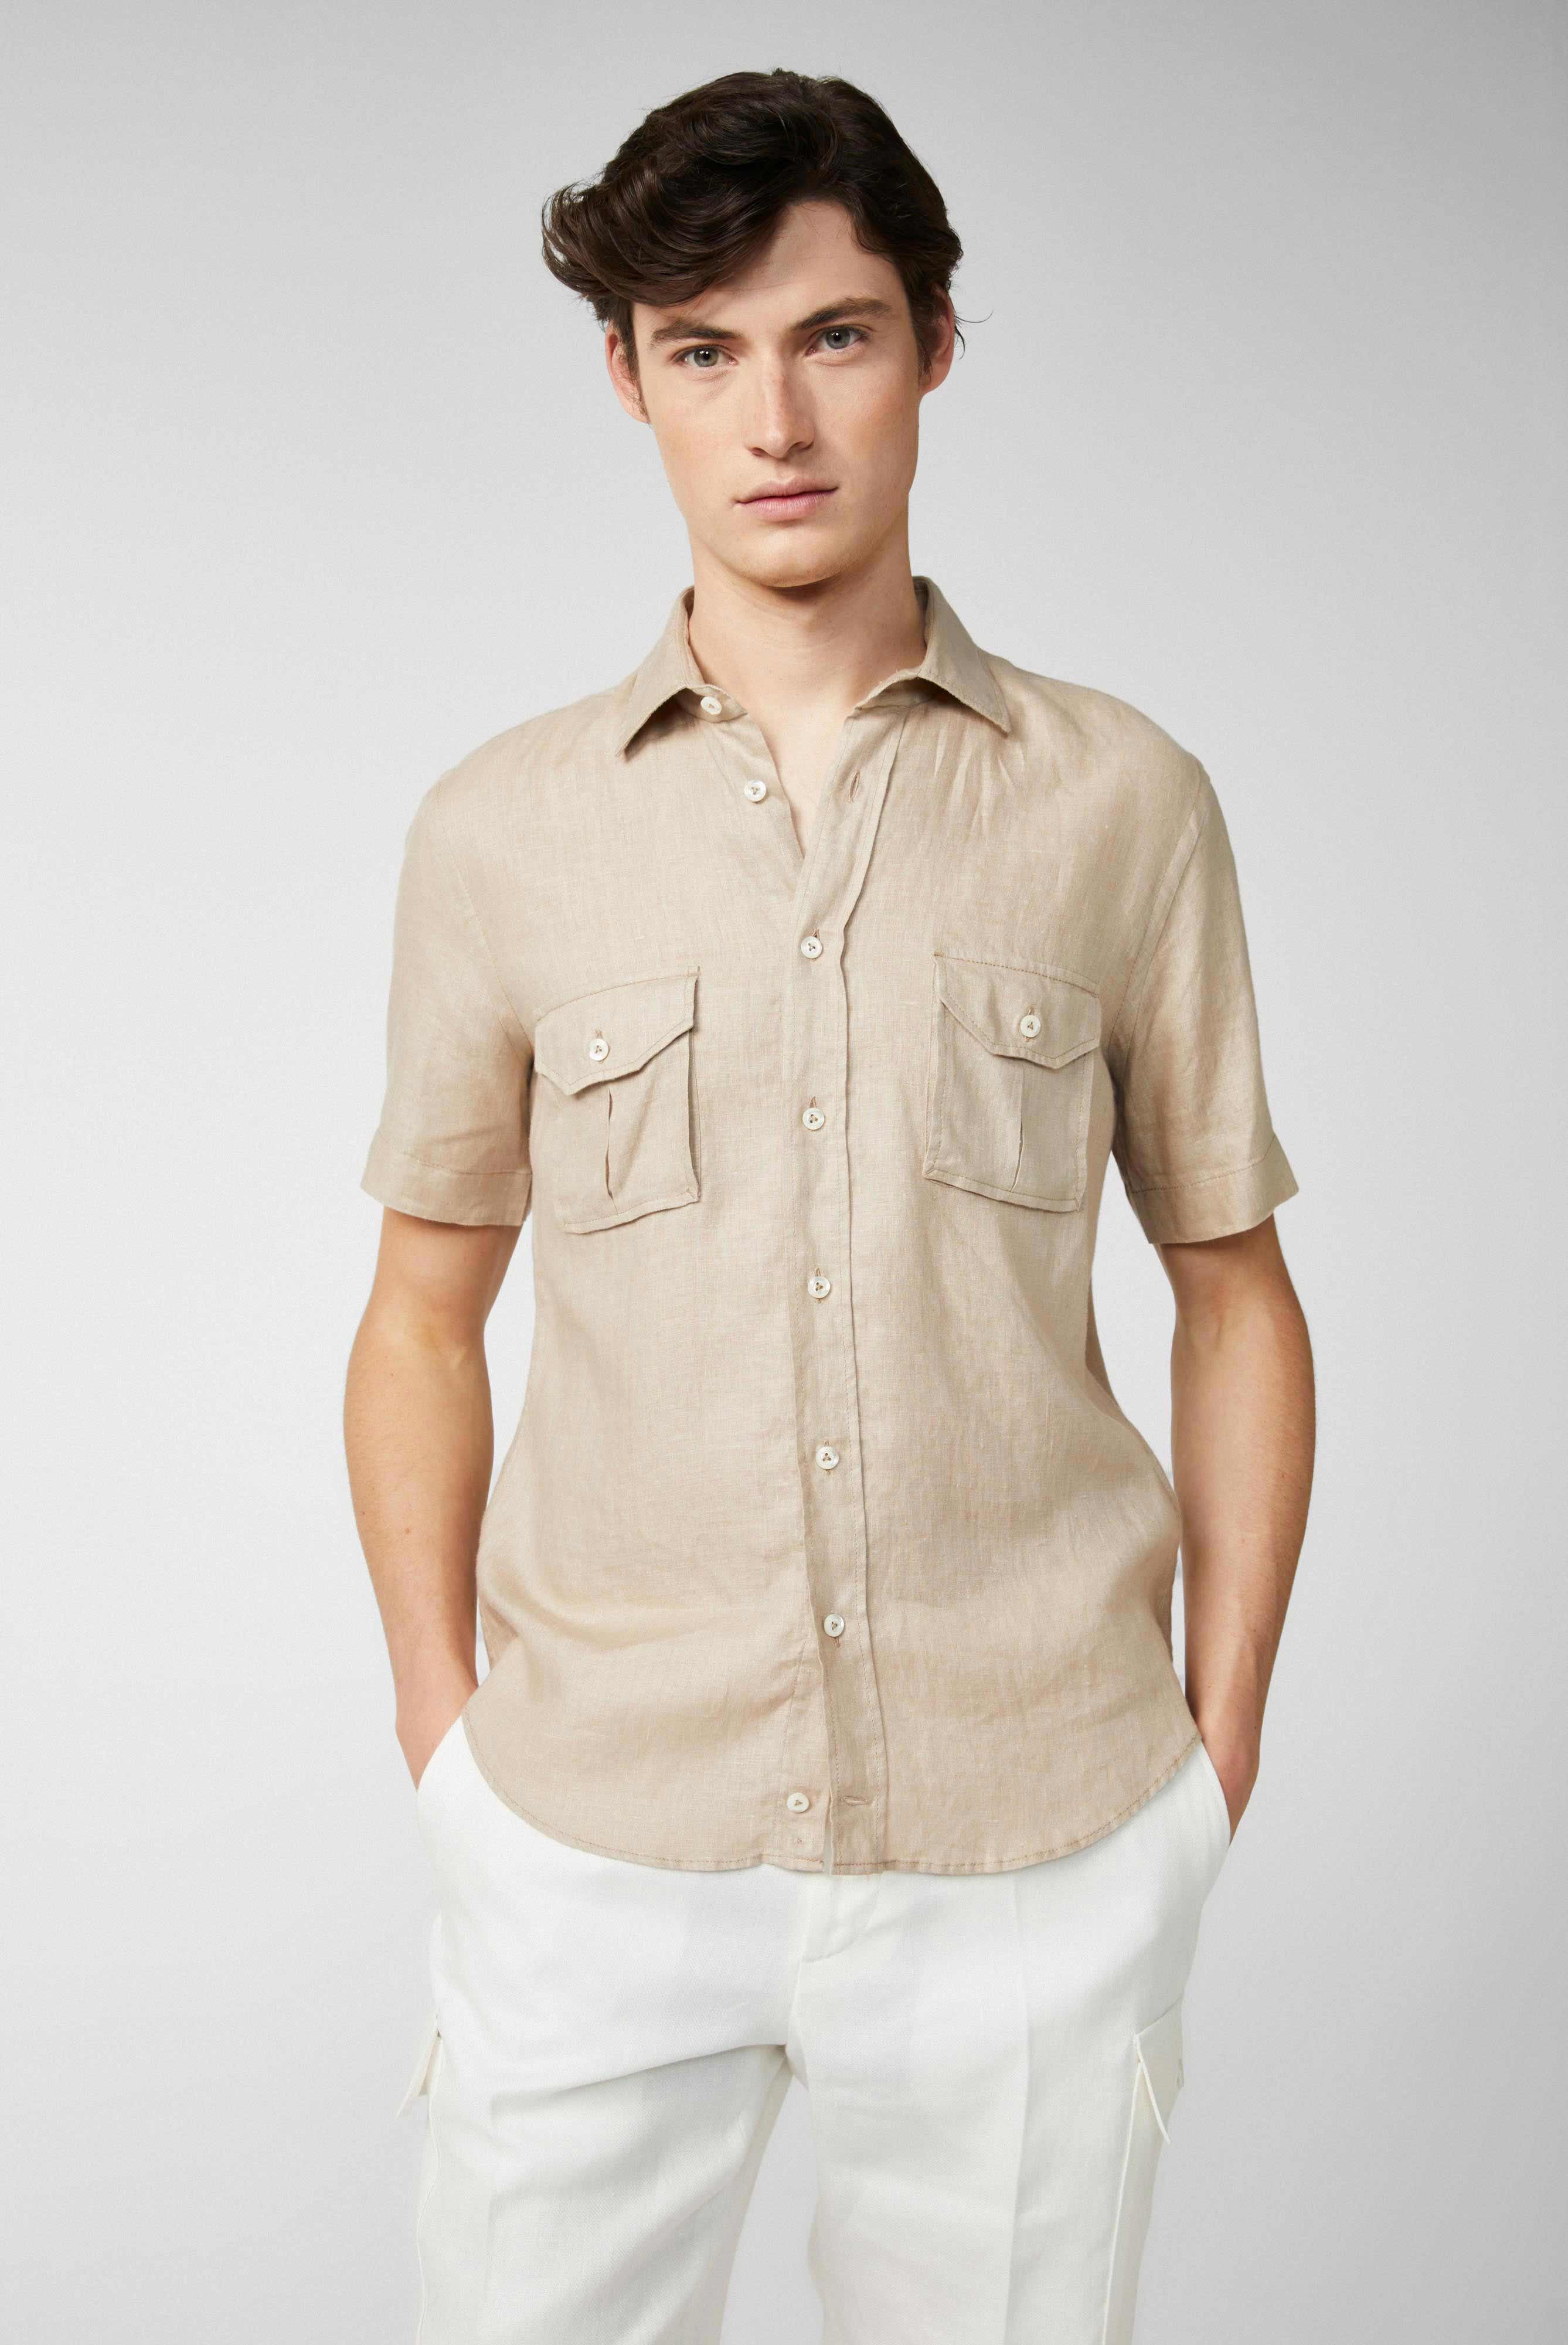 Super soft short-sleeved linen shirt in a boxy fit